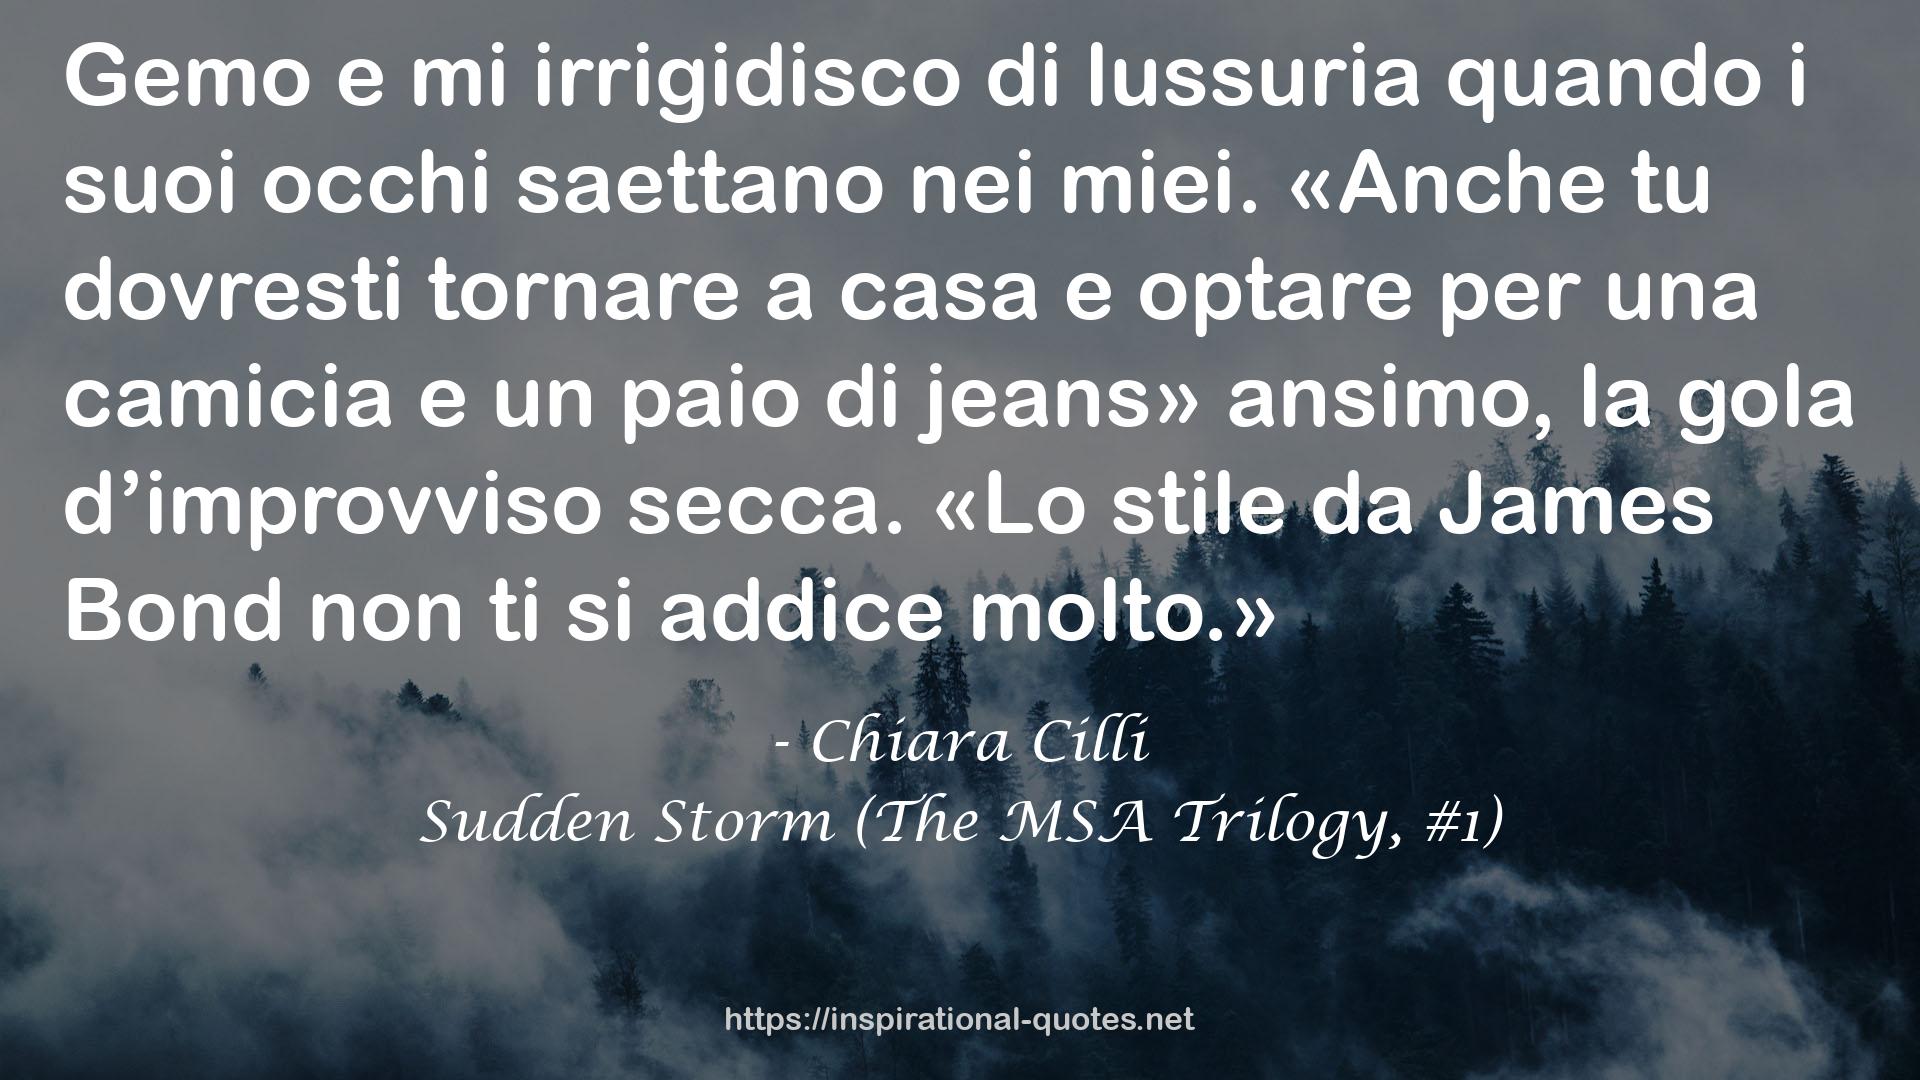 Sudden Storm (The MSA Trilogy, #1) QUOTES